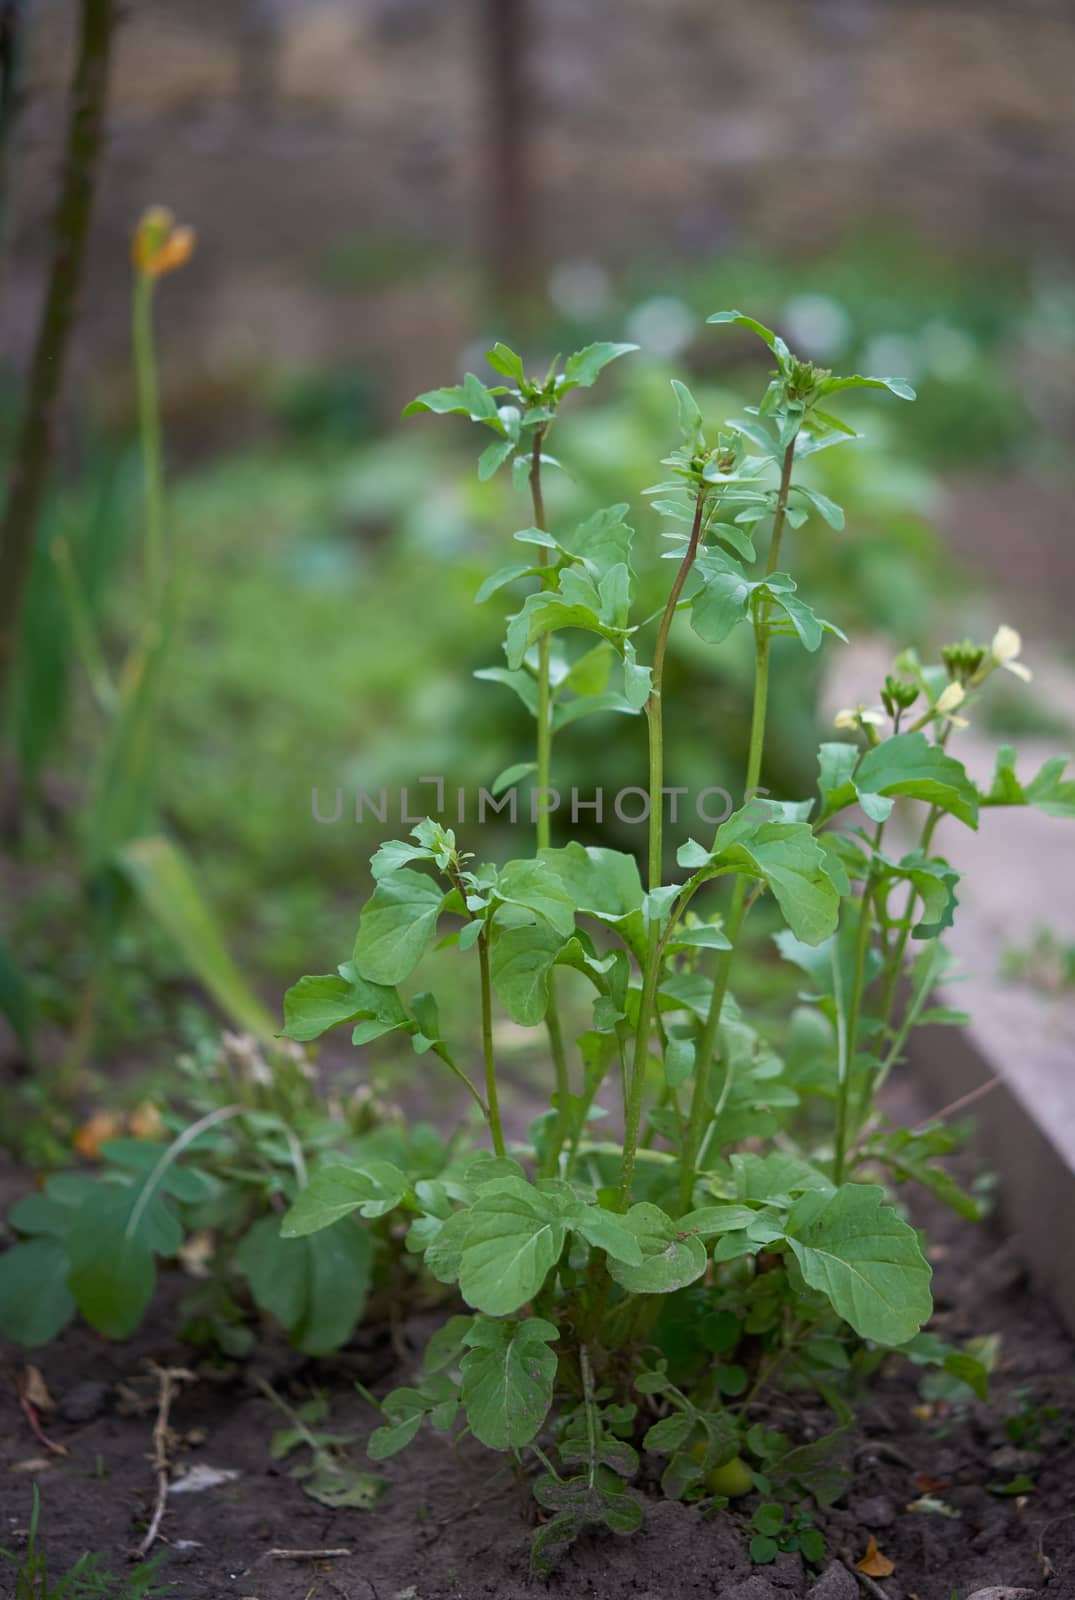 growing arugula bush with green leaves and white flowers in the garden, close up